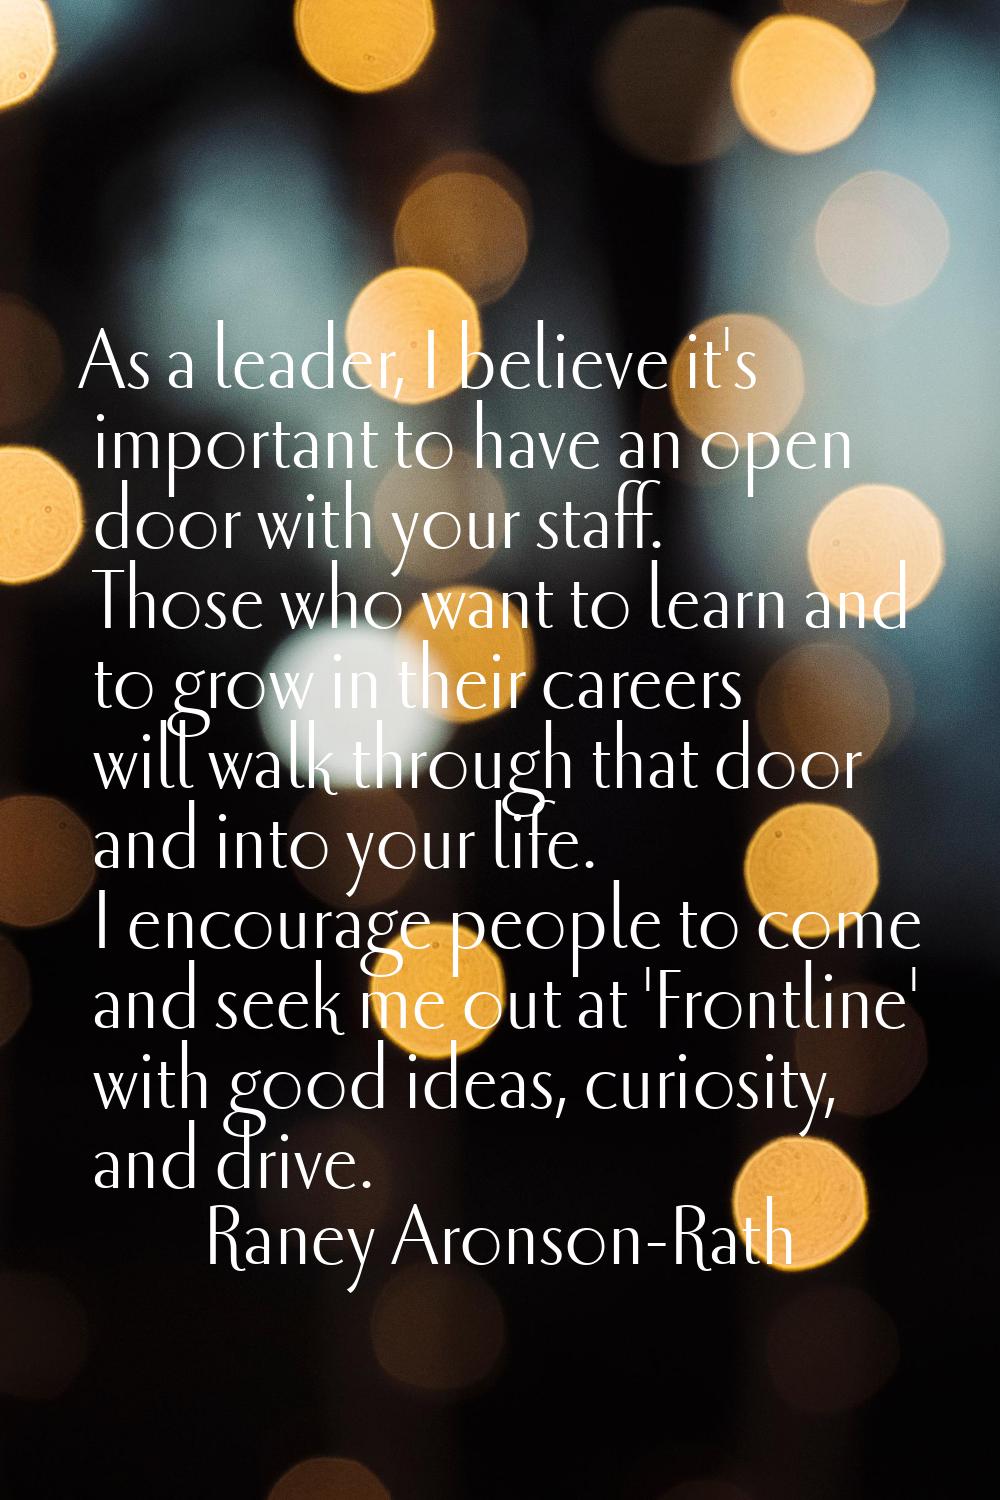 As a leader, I believe it's important to have an open door with your staff. Those who want to learn